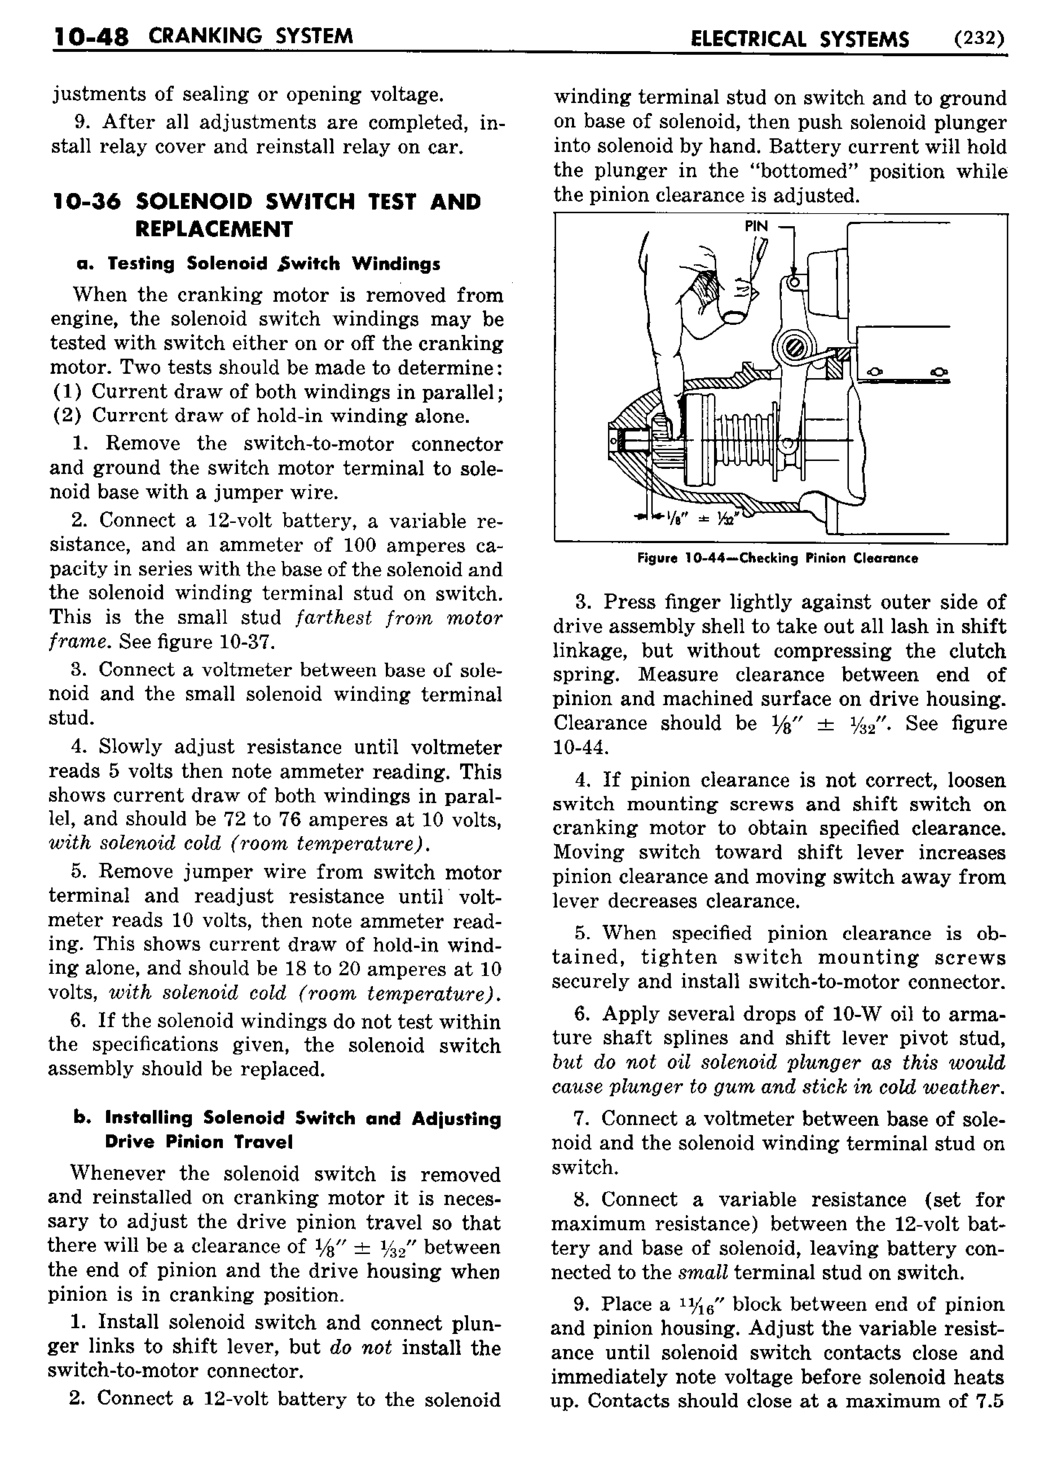 n_11 1953 Buick Shop Manual - Electrical Systems-048-048.jpg